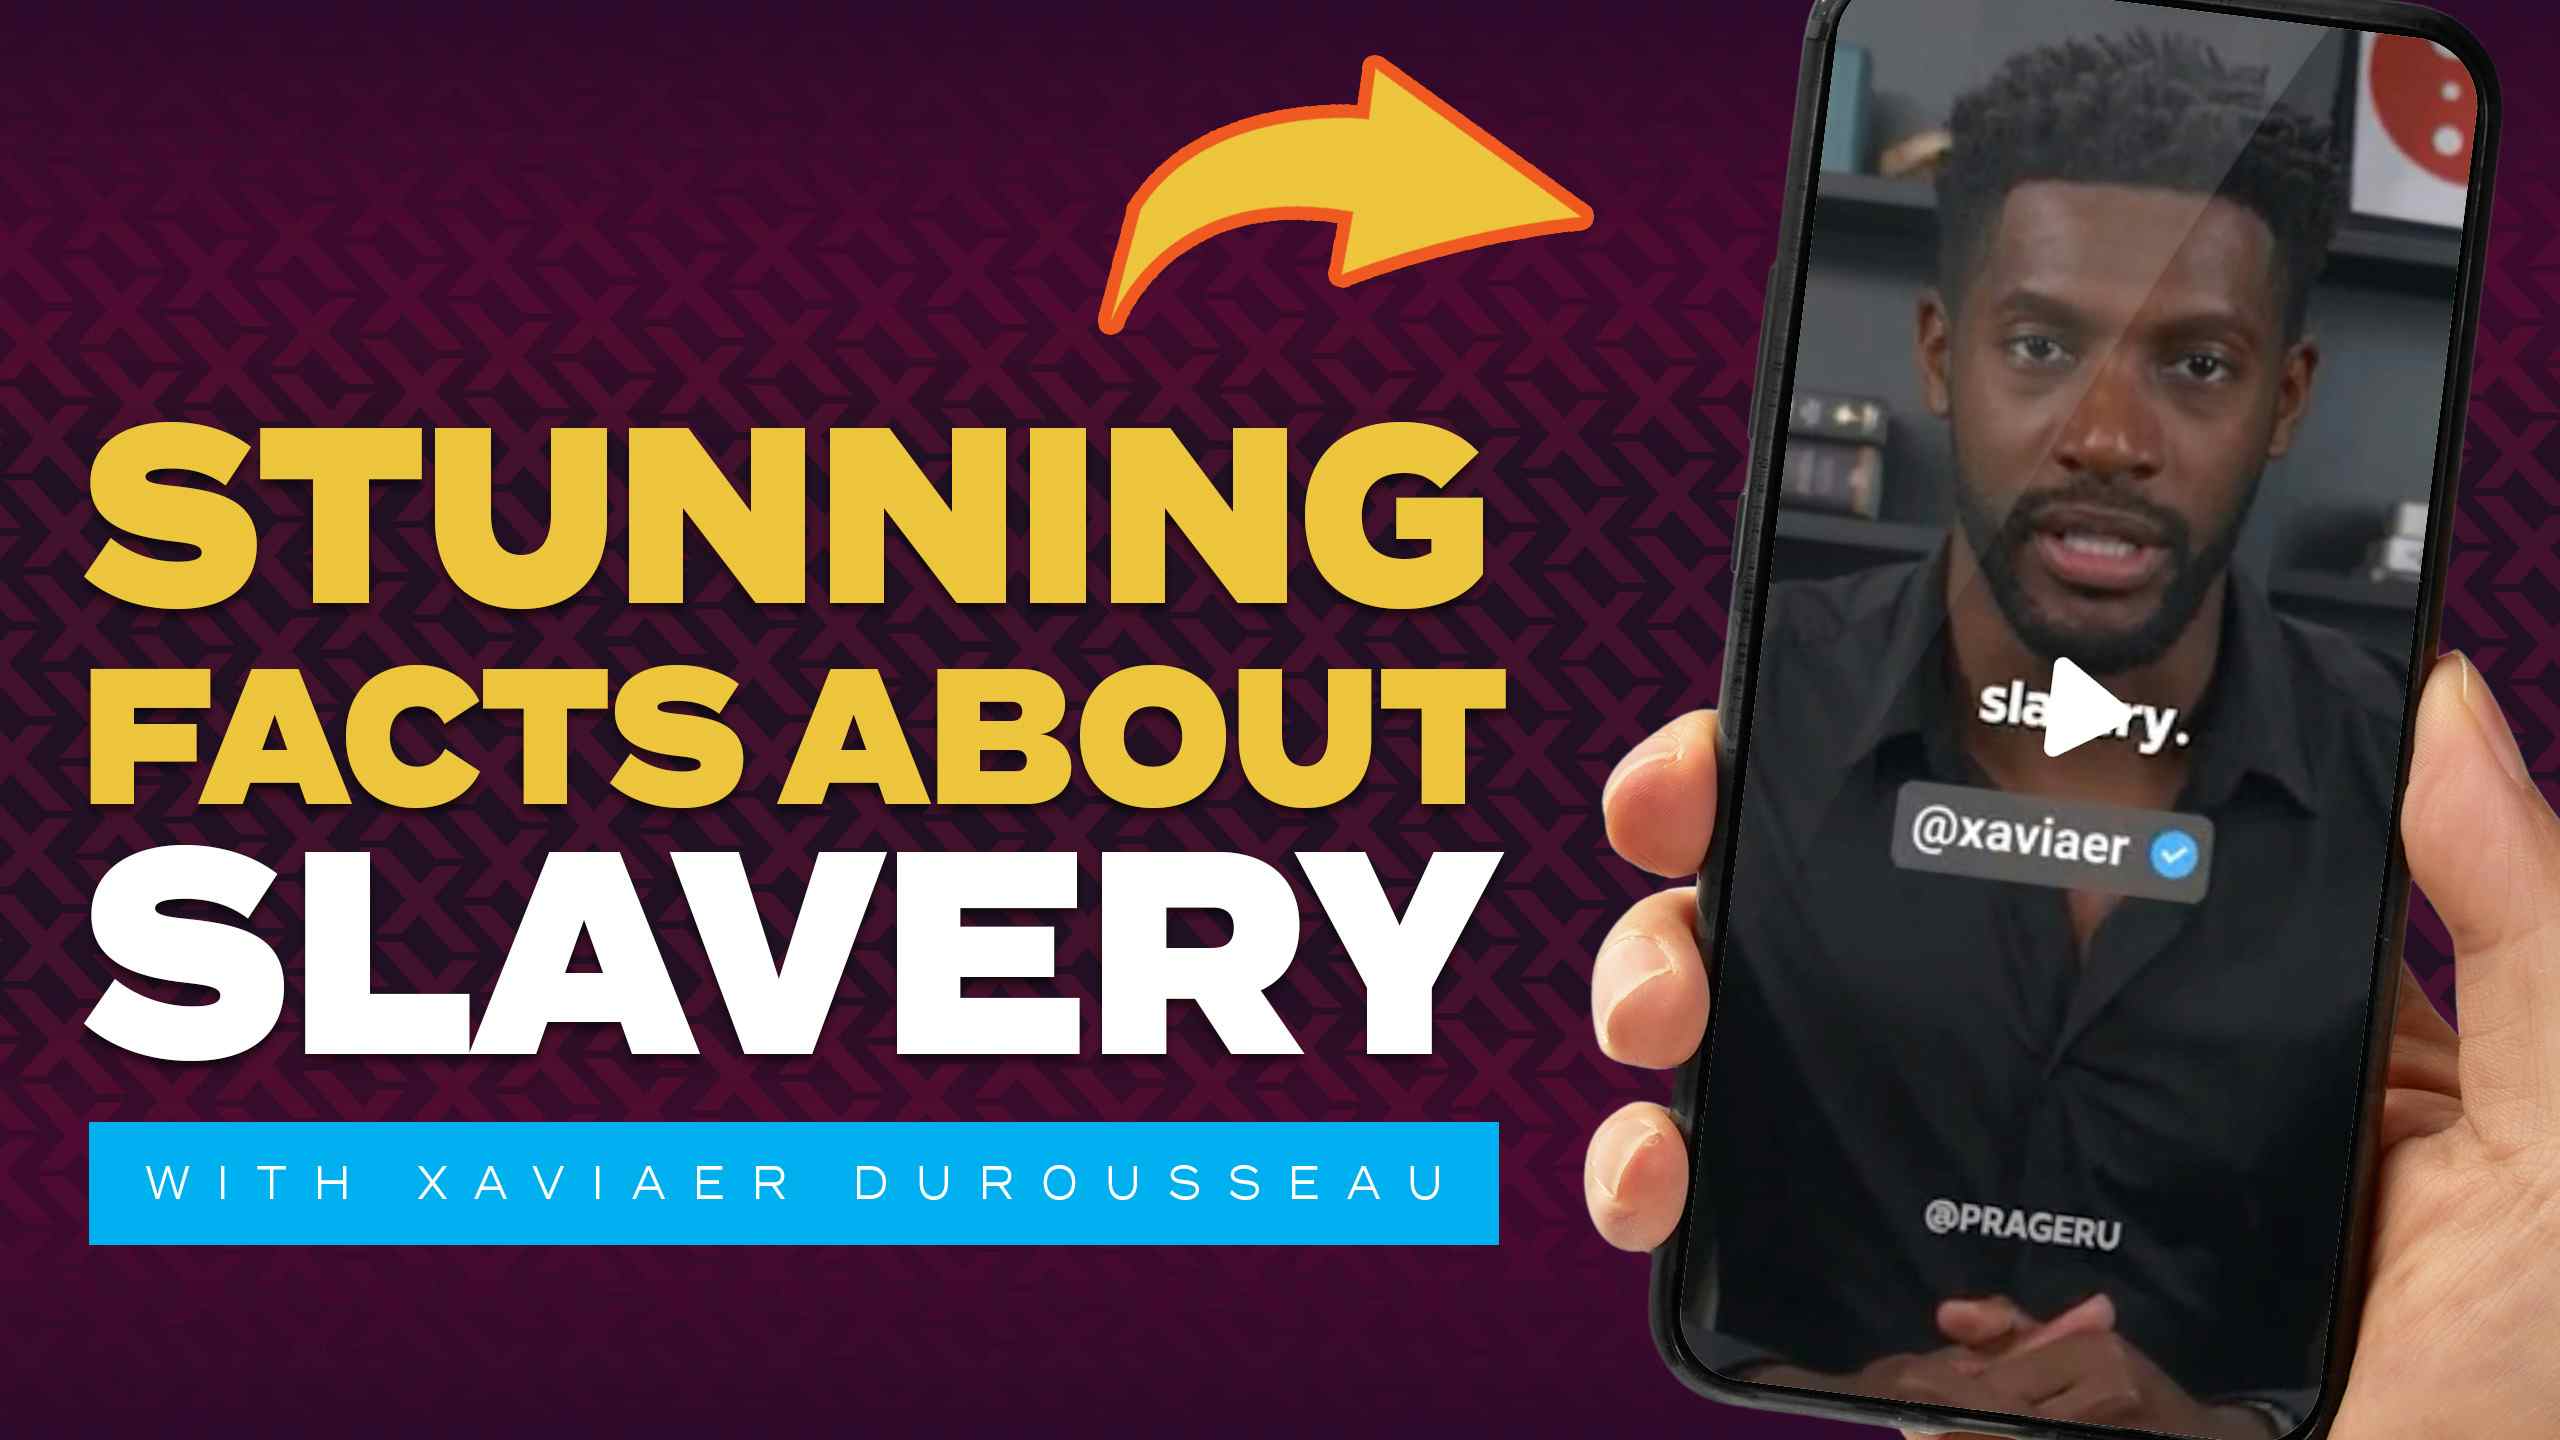 Stunning Facts about Slavery with Xaviaer DuRousseau